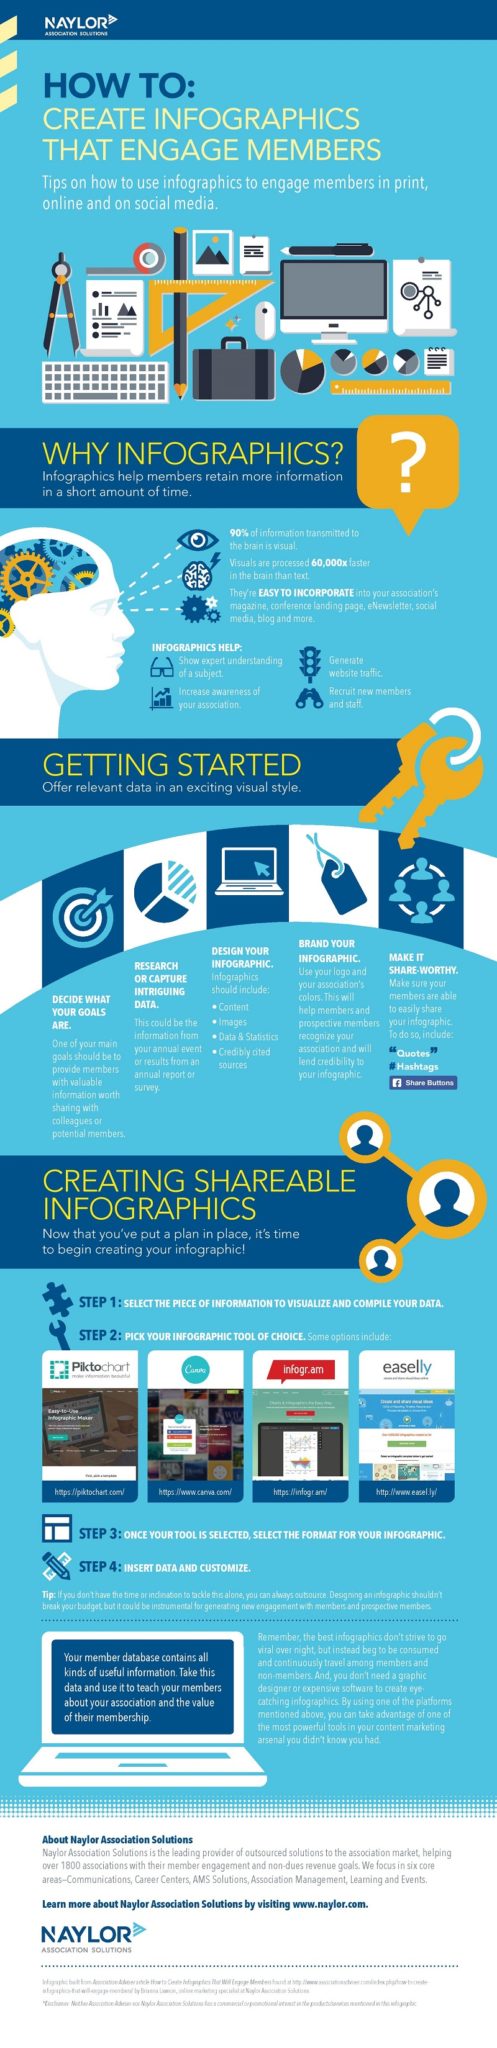 How to Create Infographics That Will Engage Members